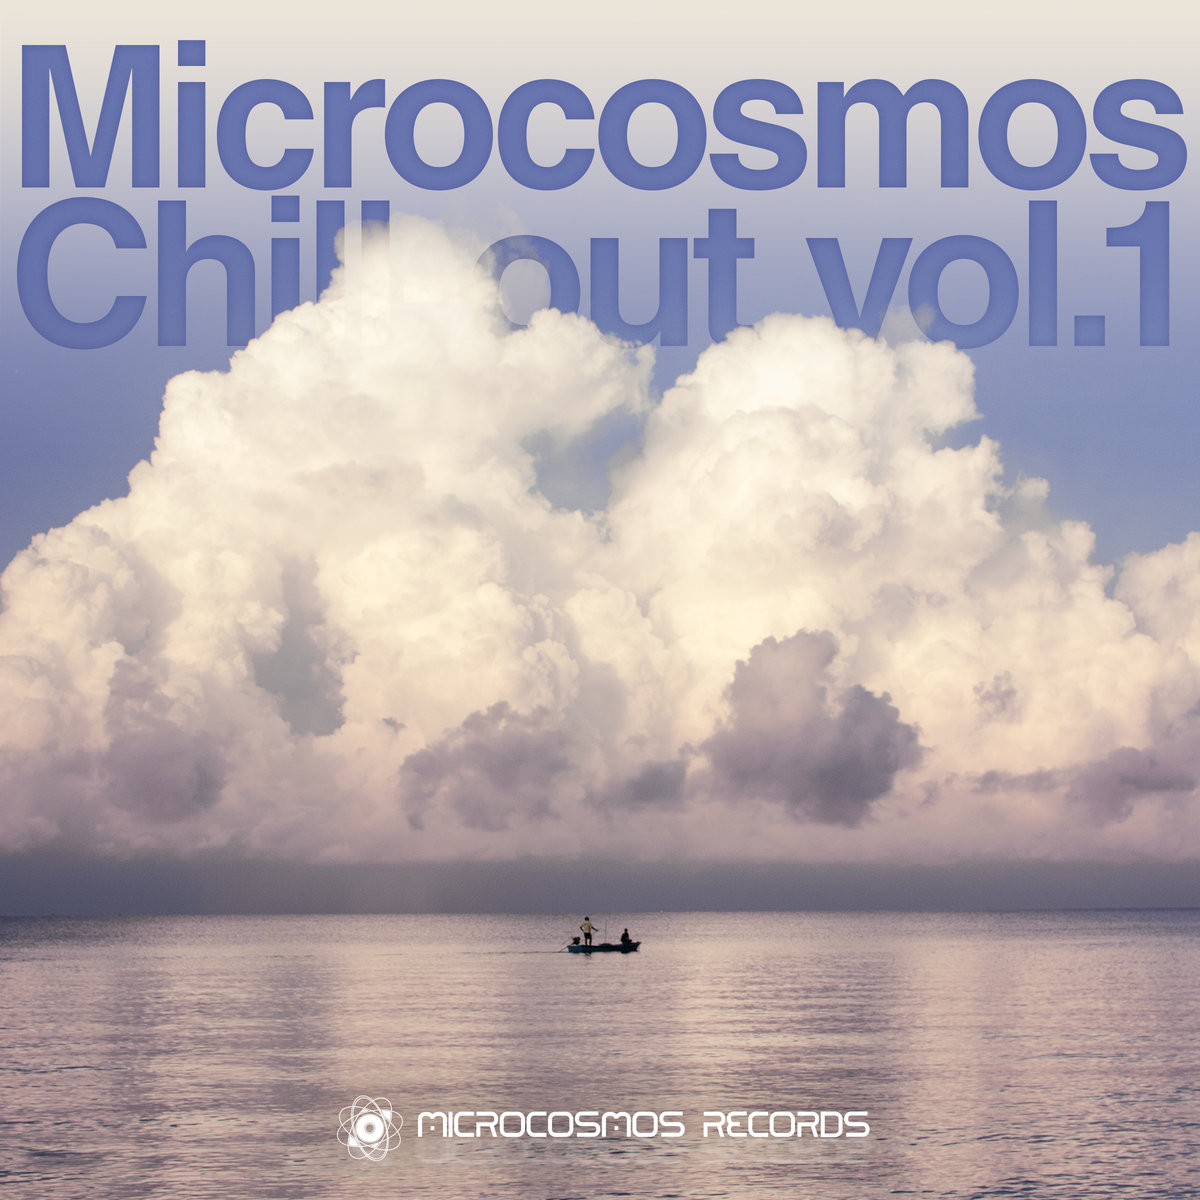 Slow Reflections - Unfolding Flower @ 'Various Artists - Microcosmos Chill-out Vol.1' album (ambient, chill-out)